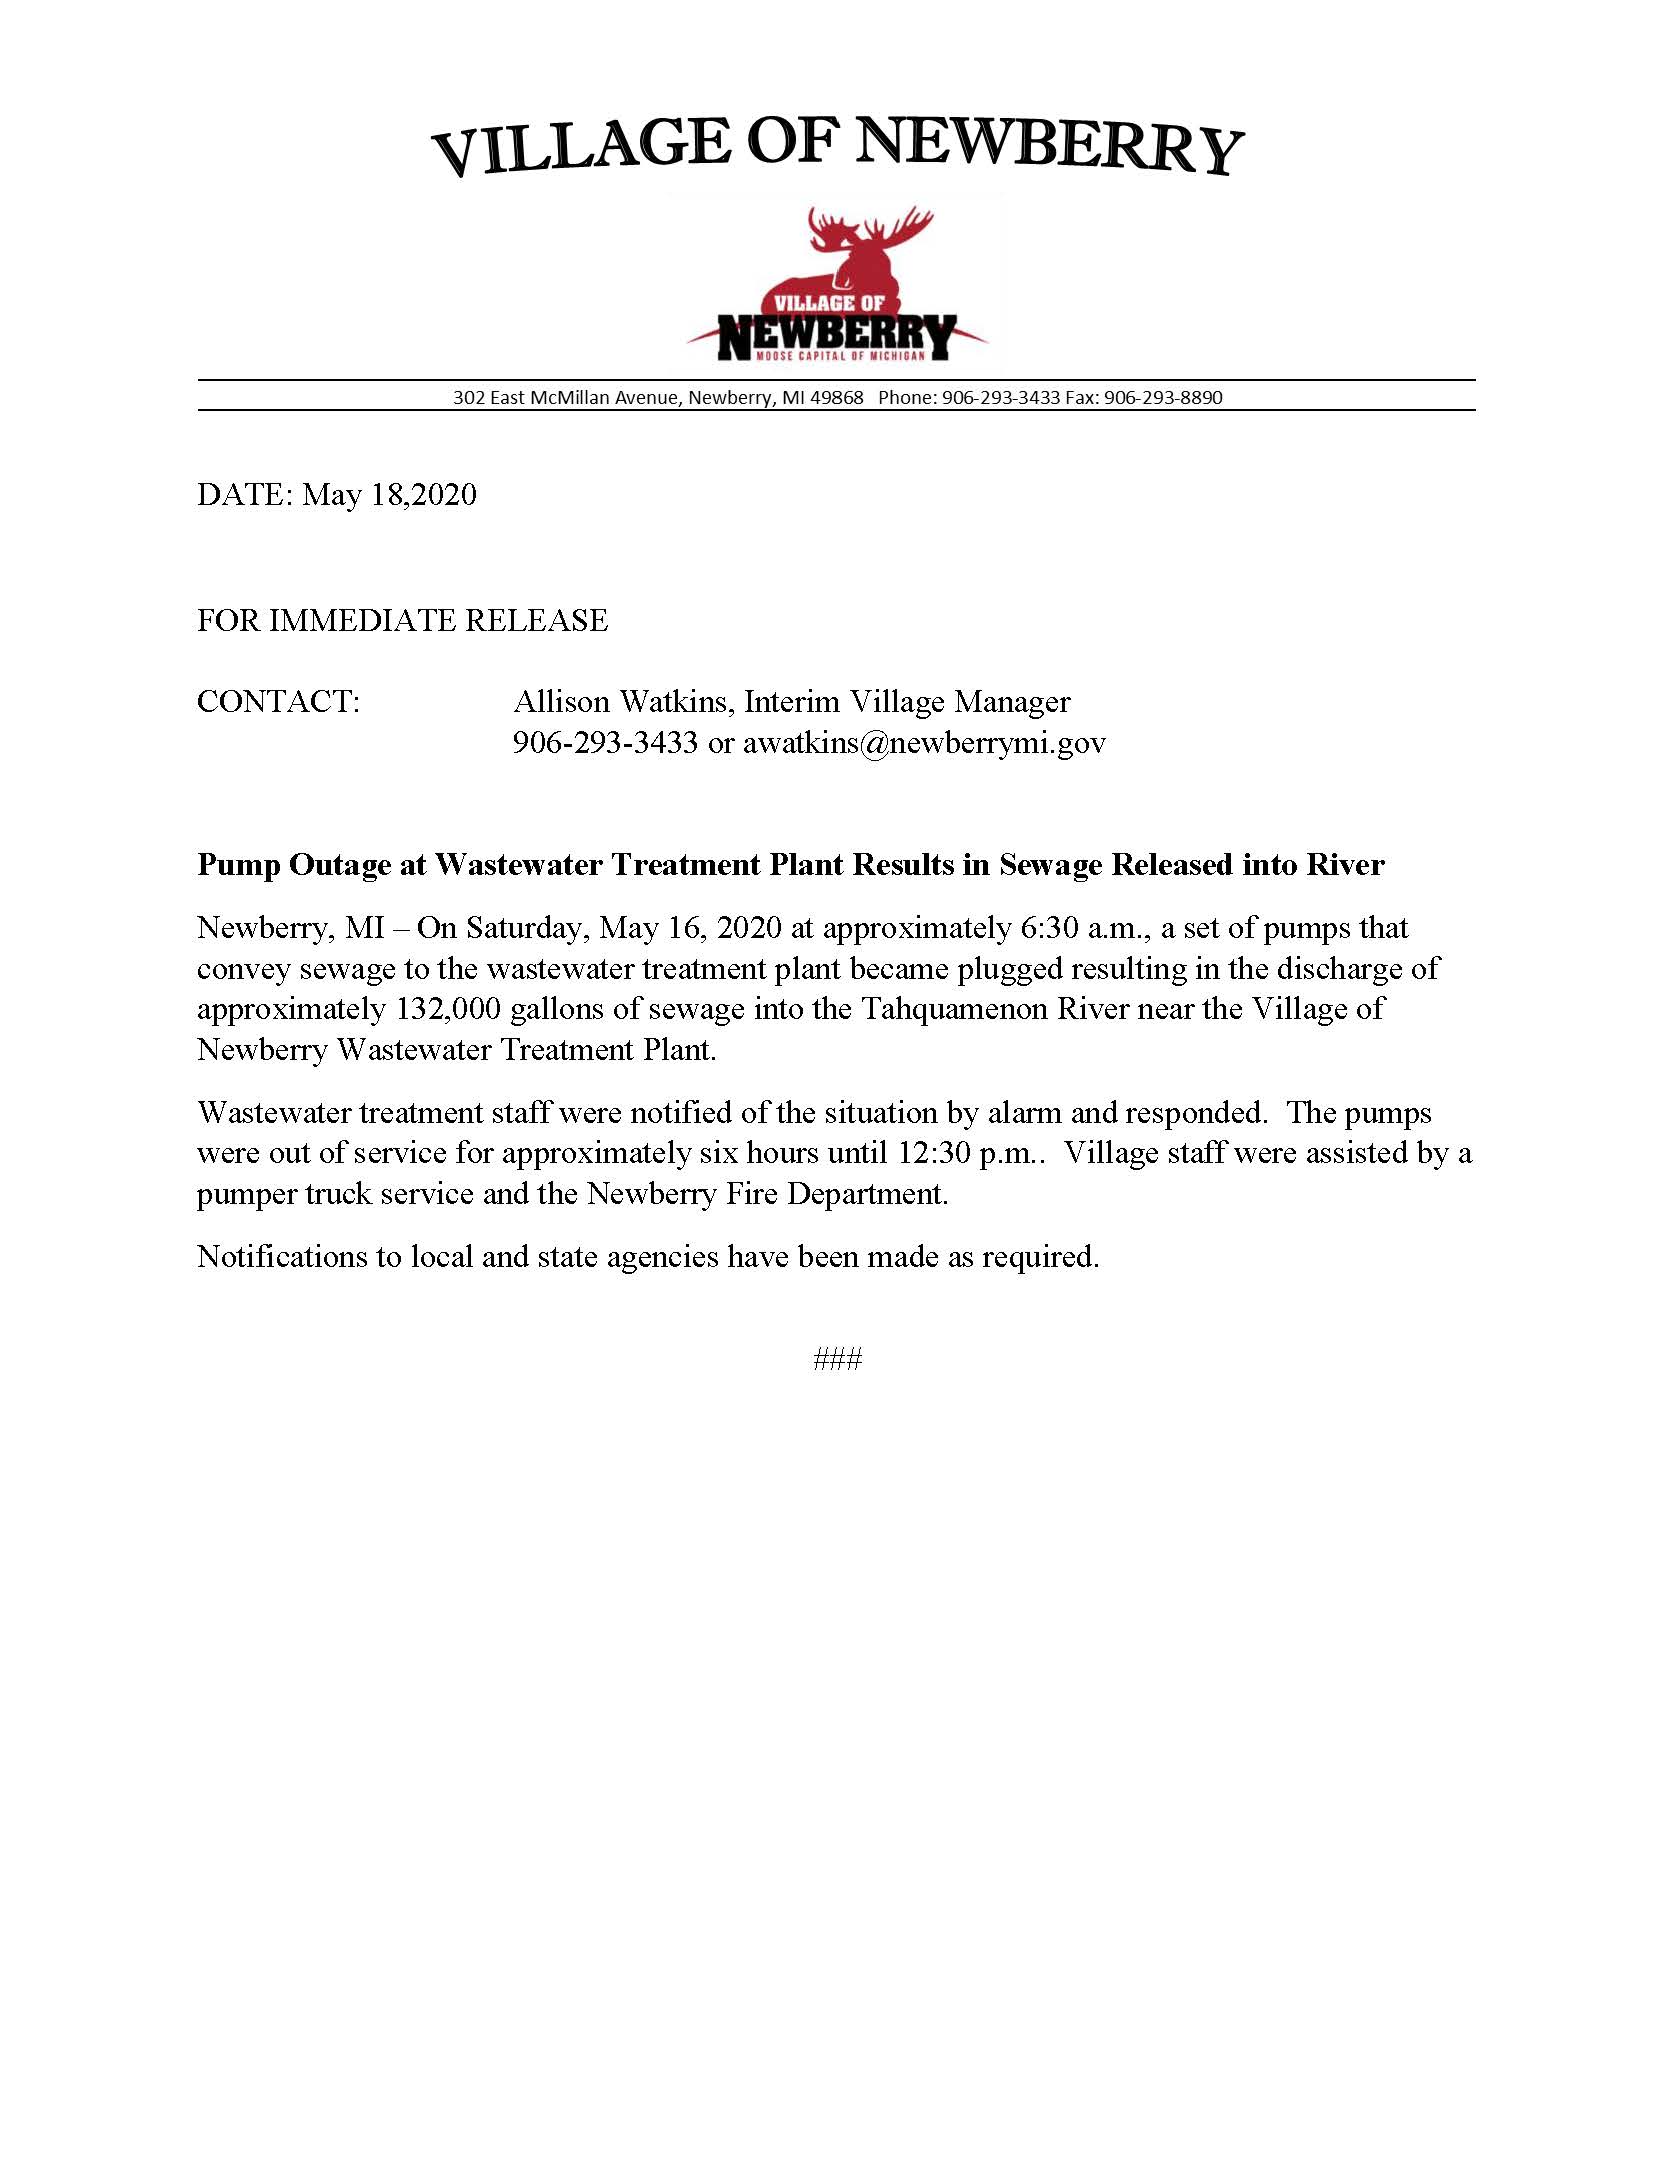 Press Release - Wasterwater Treatment Plant Sewage Pumps May 2020